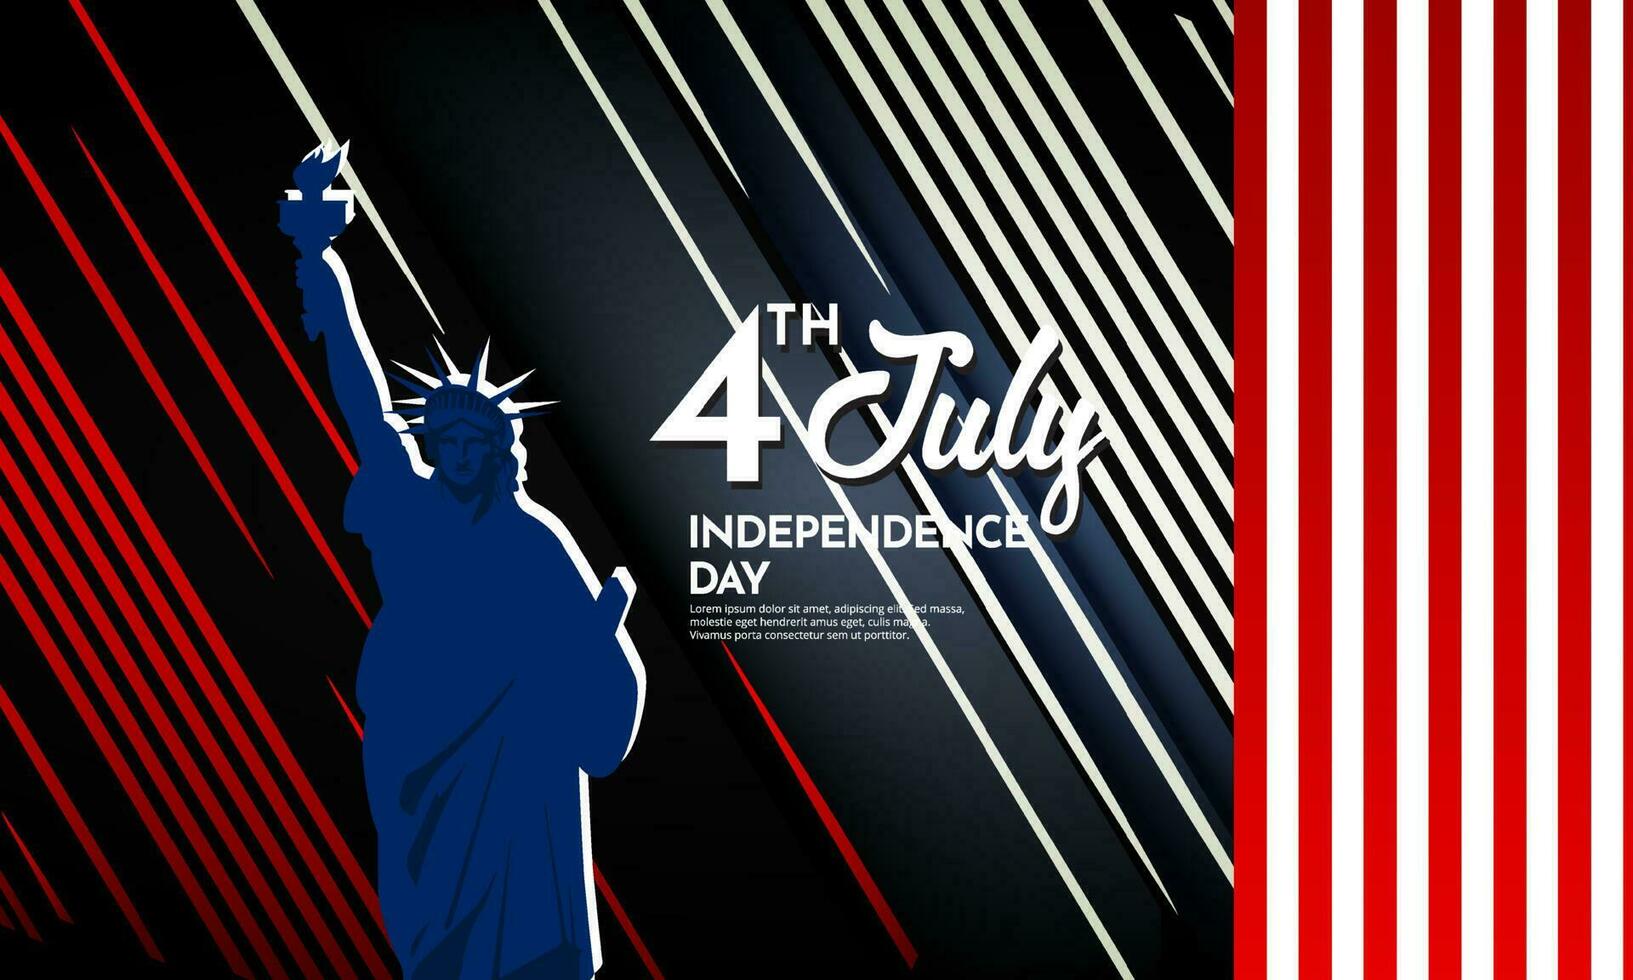 Fourth of July American independence day design with flag vector. American Independence day design banner vector